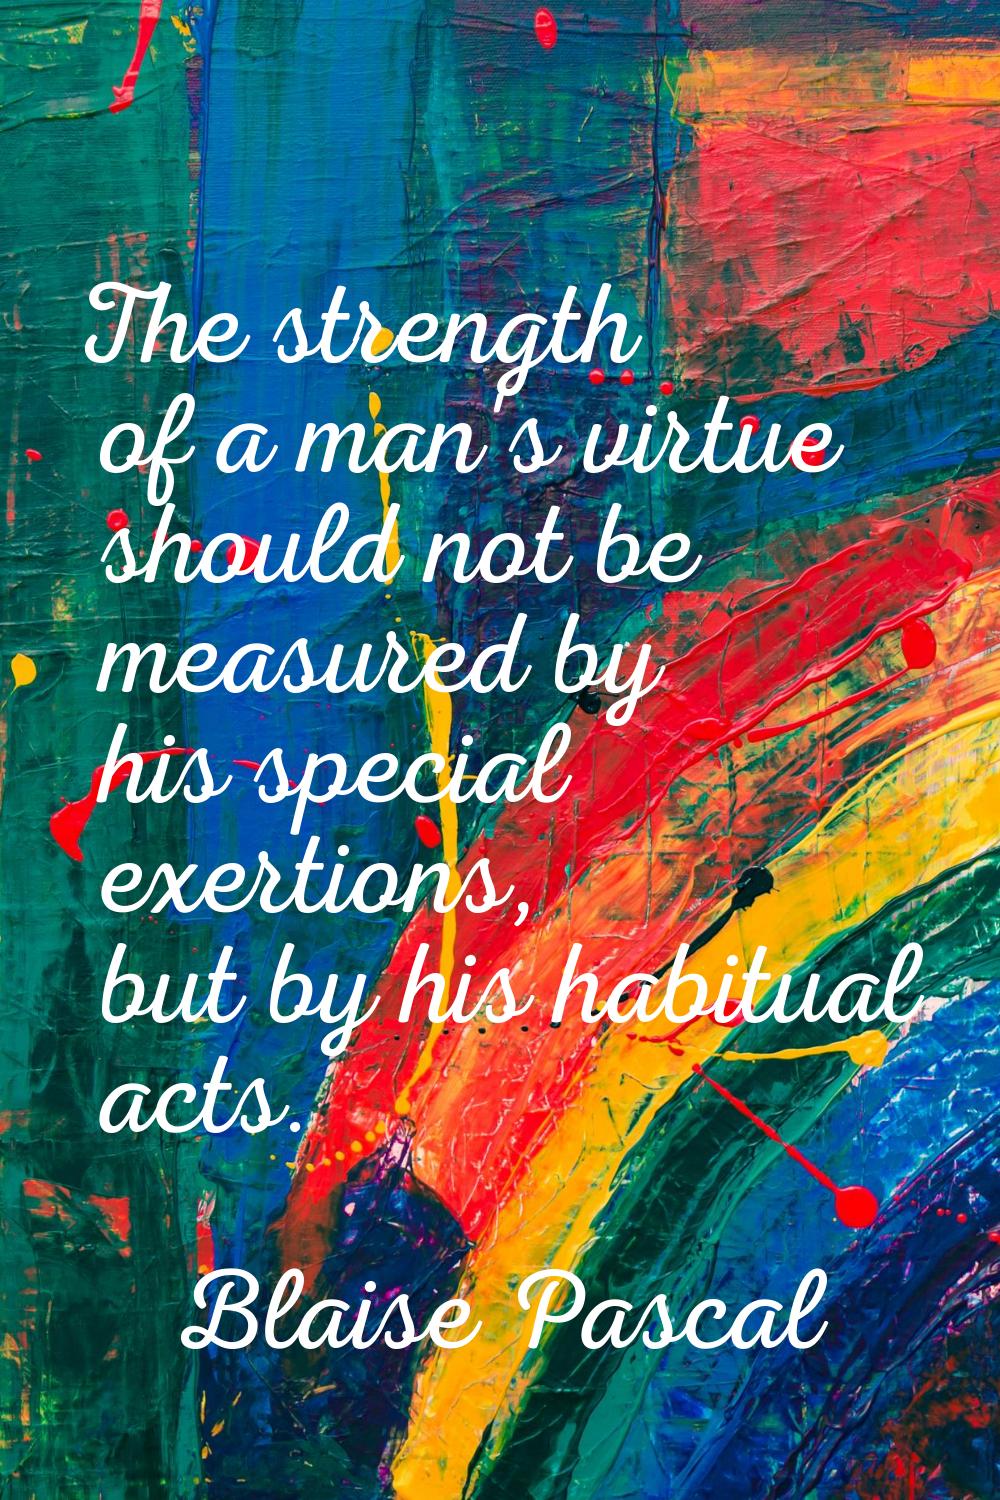 The strength of a man's virtue should not be measured by his special exertions, but by his habitual